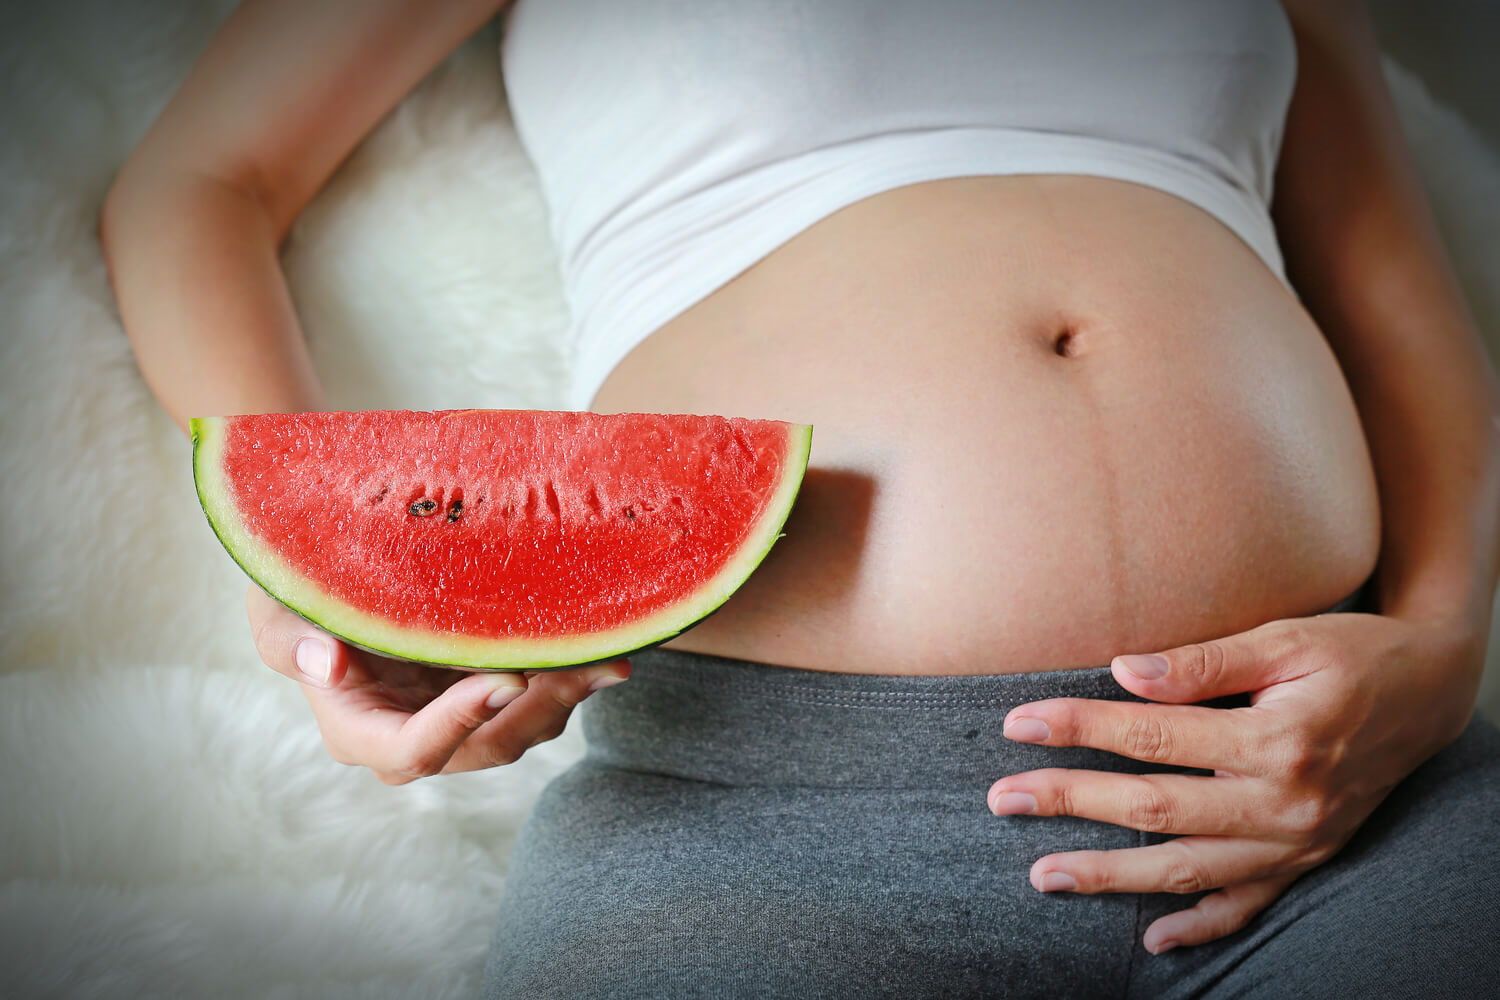 Watermelons help in digestion during pregnancy